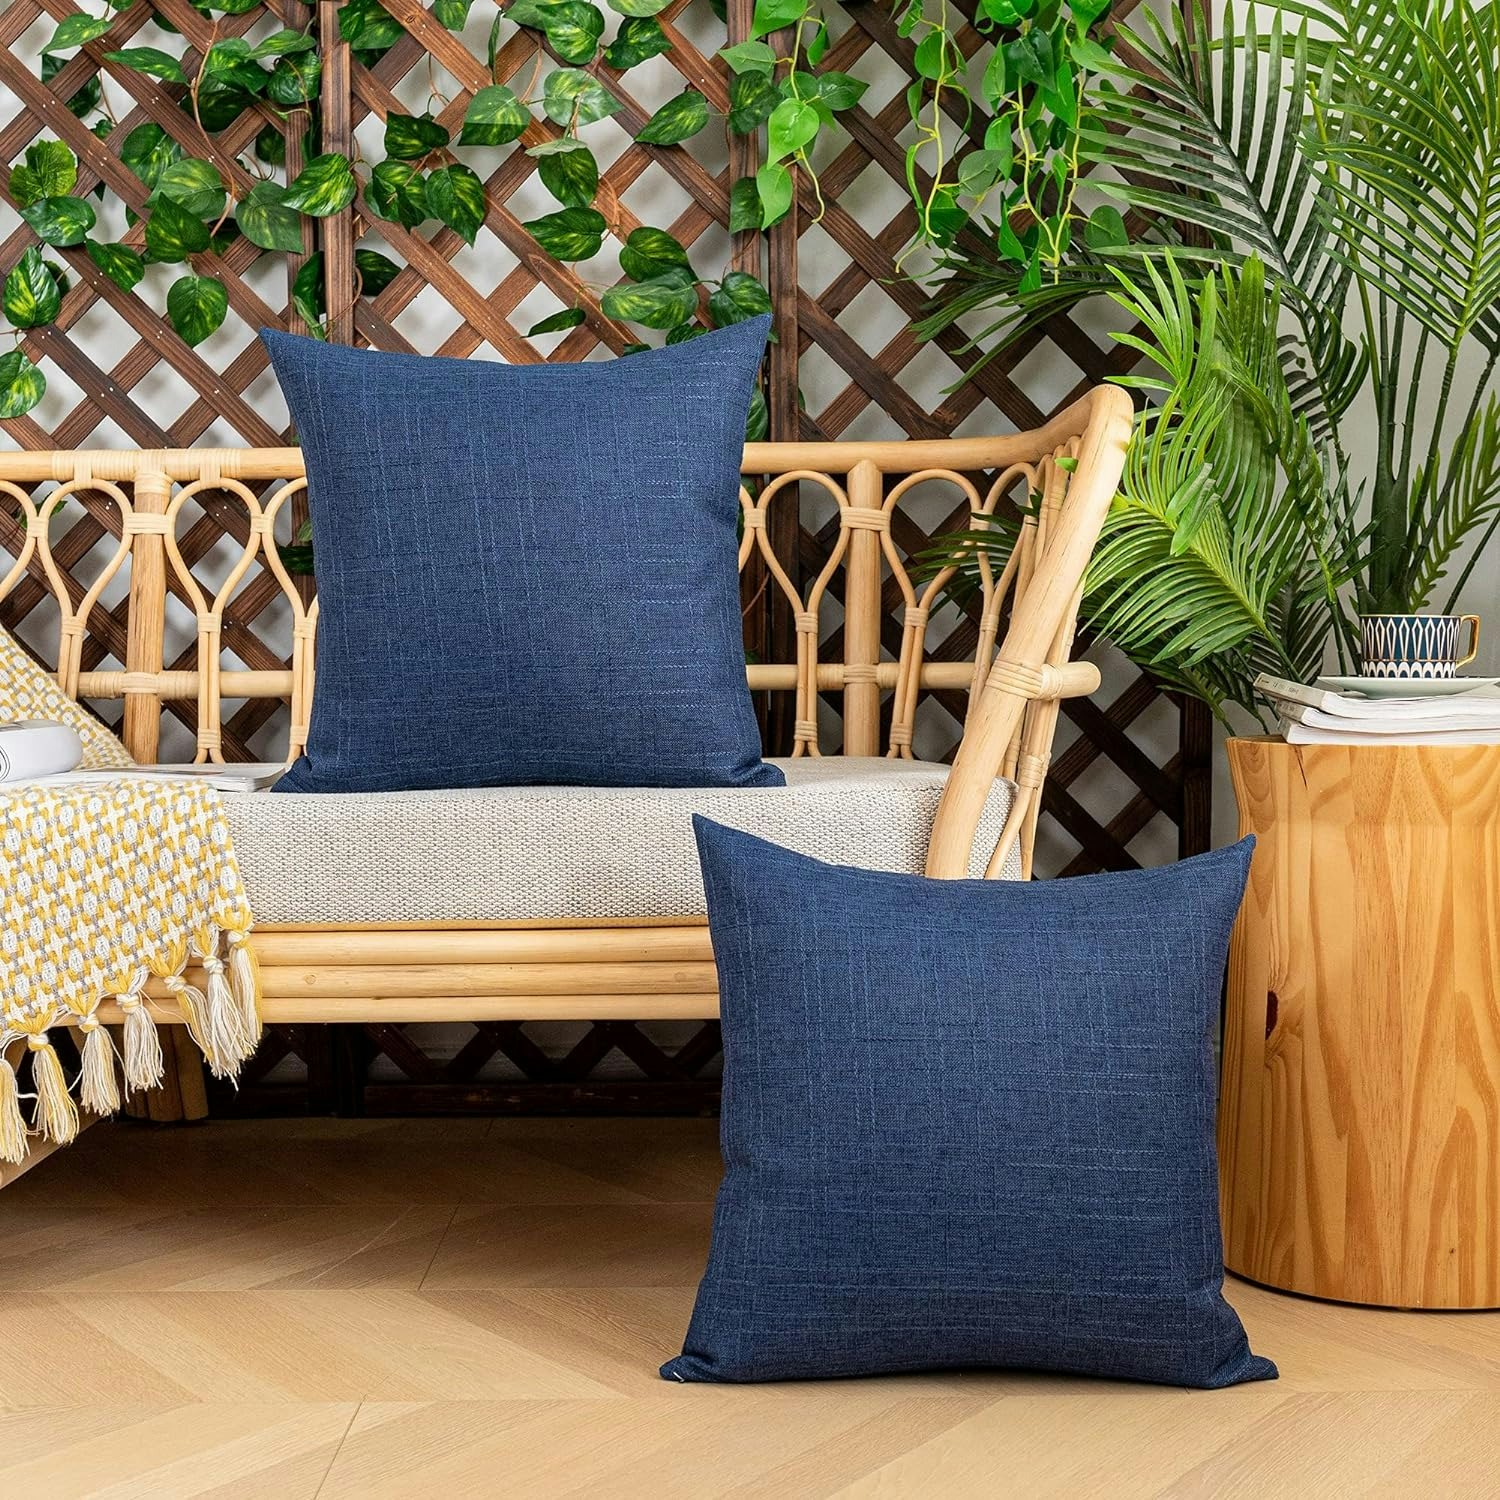 45 Cool Things for Your Backyard That Seem Expensive but Are Cheap AF on Amazon